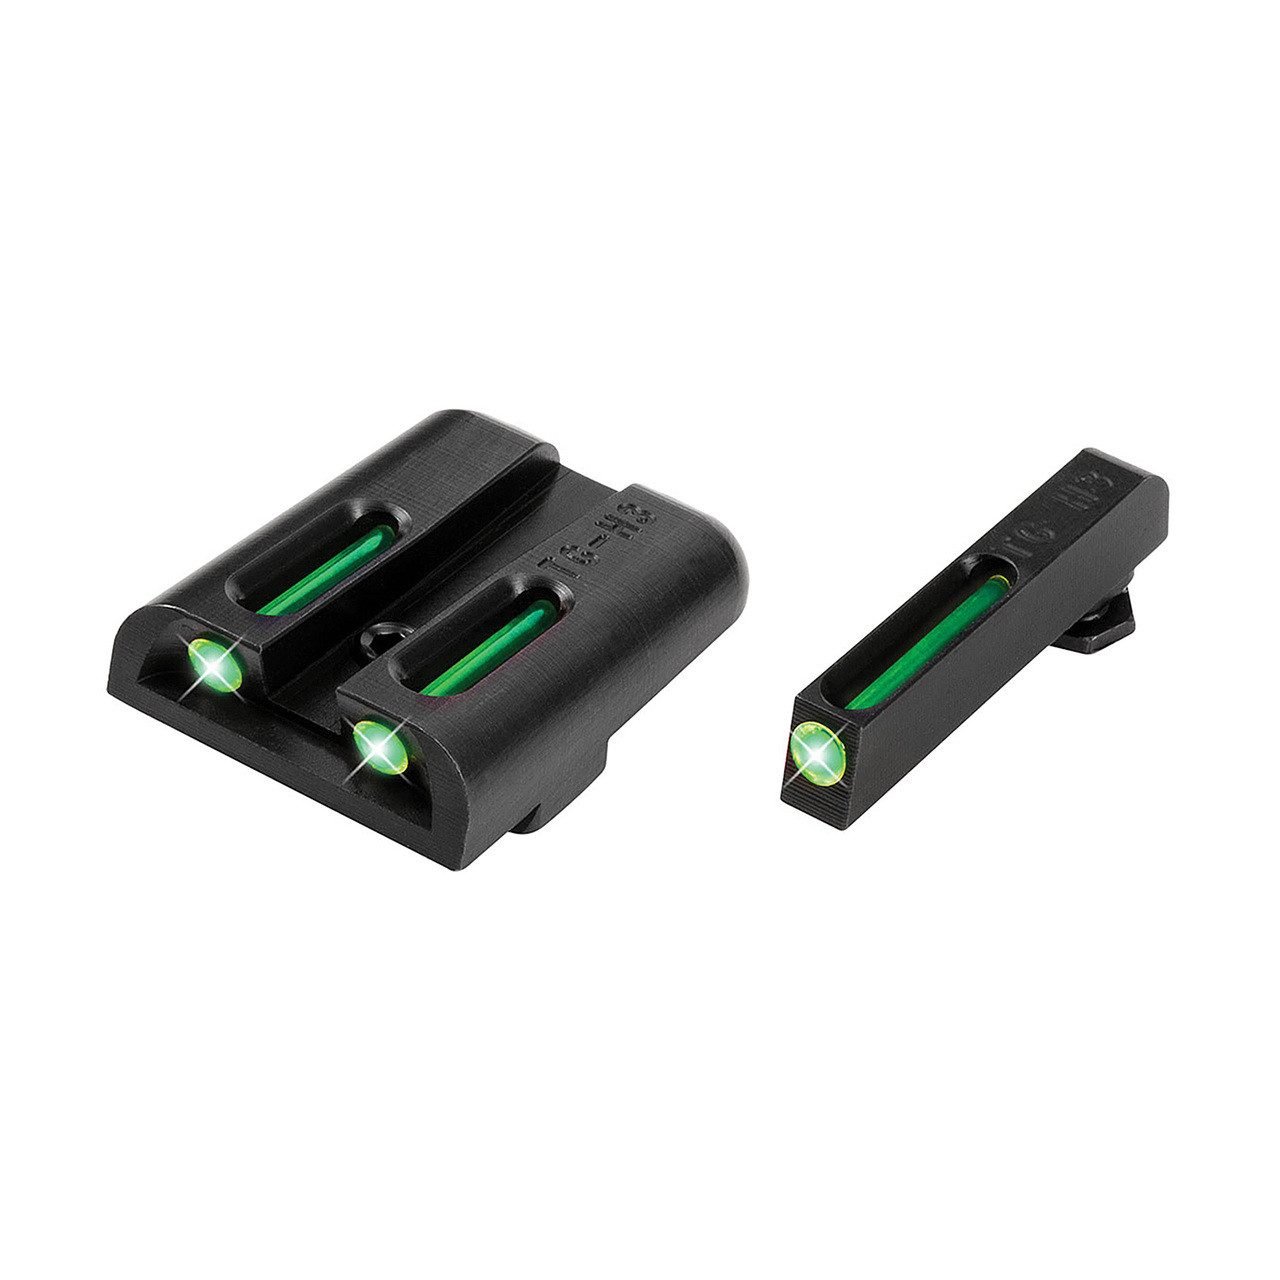 TRUGLO. Has anyone else used this paint for night sights? - Miscellaneous -  USCCA Community